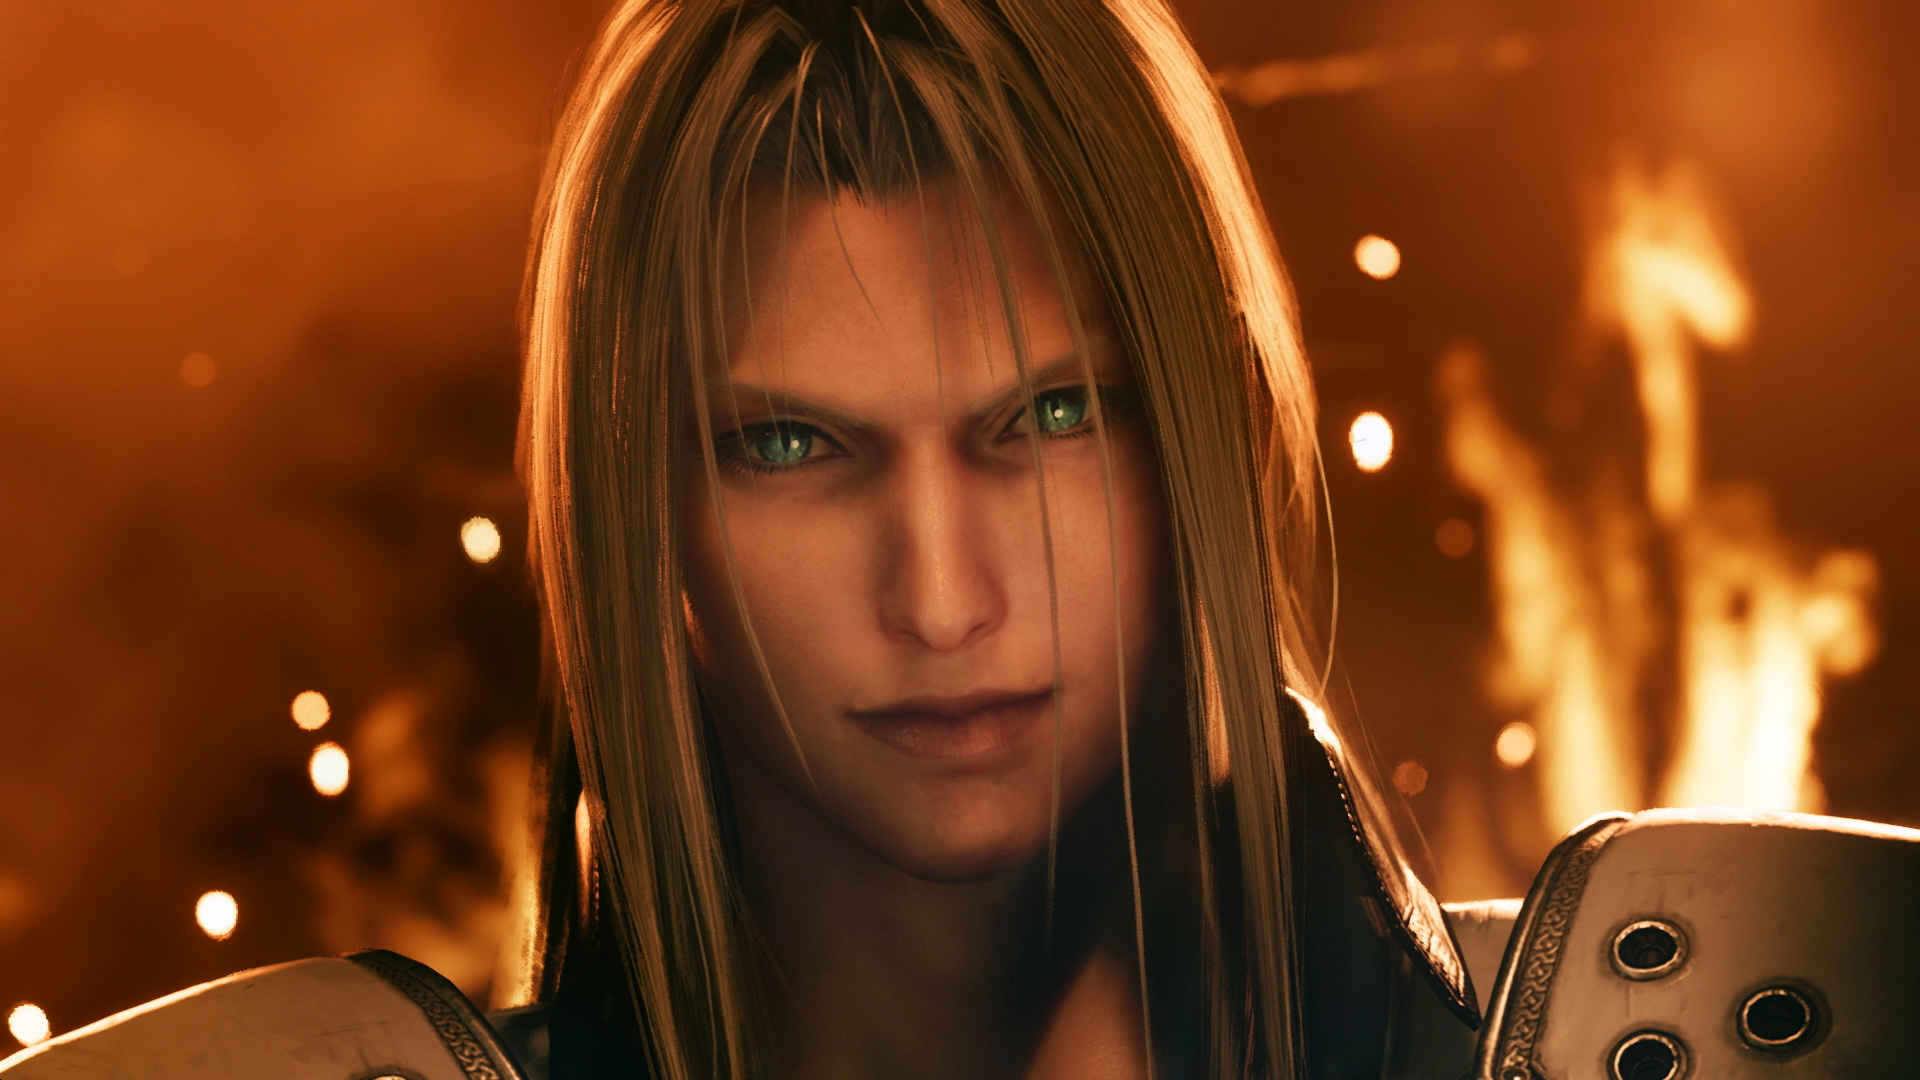 Image for I hope Final Fantasy 7 Remake doesn’t ruin what made Sephiroth such a great villain - mystique